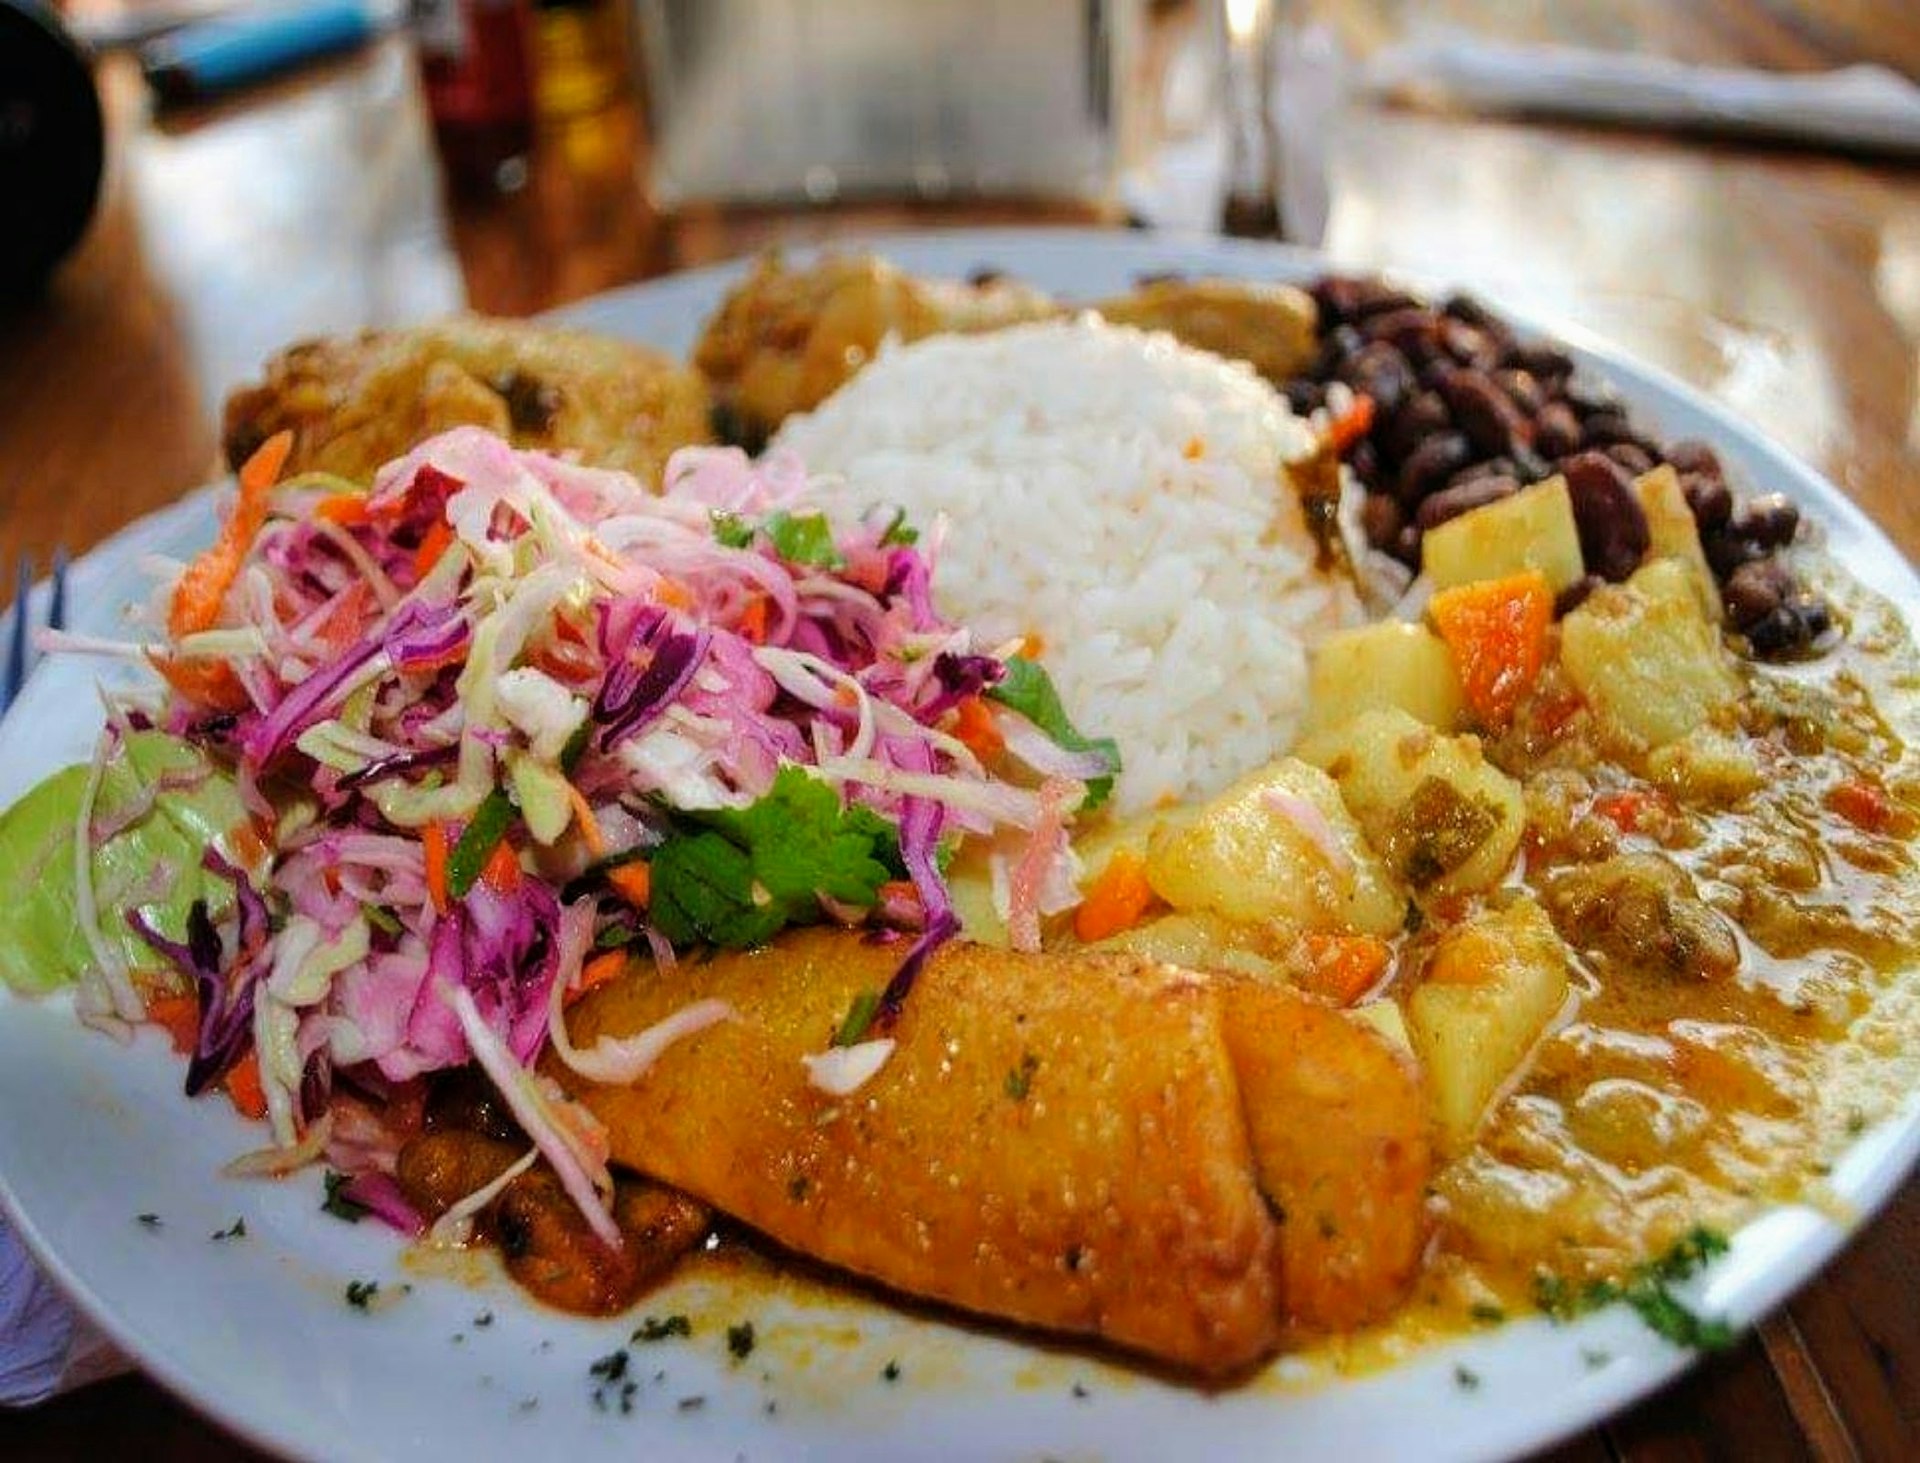 Casado is a traditional dish in Costa Rican cuisine